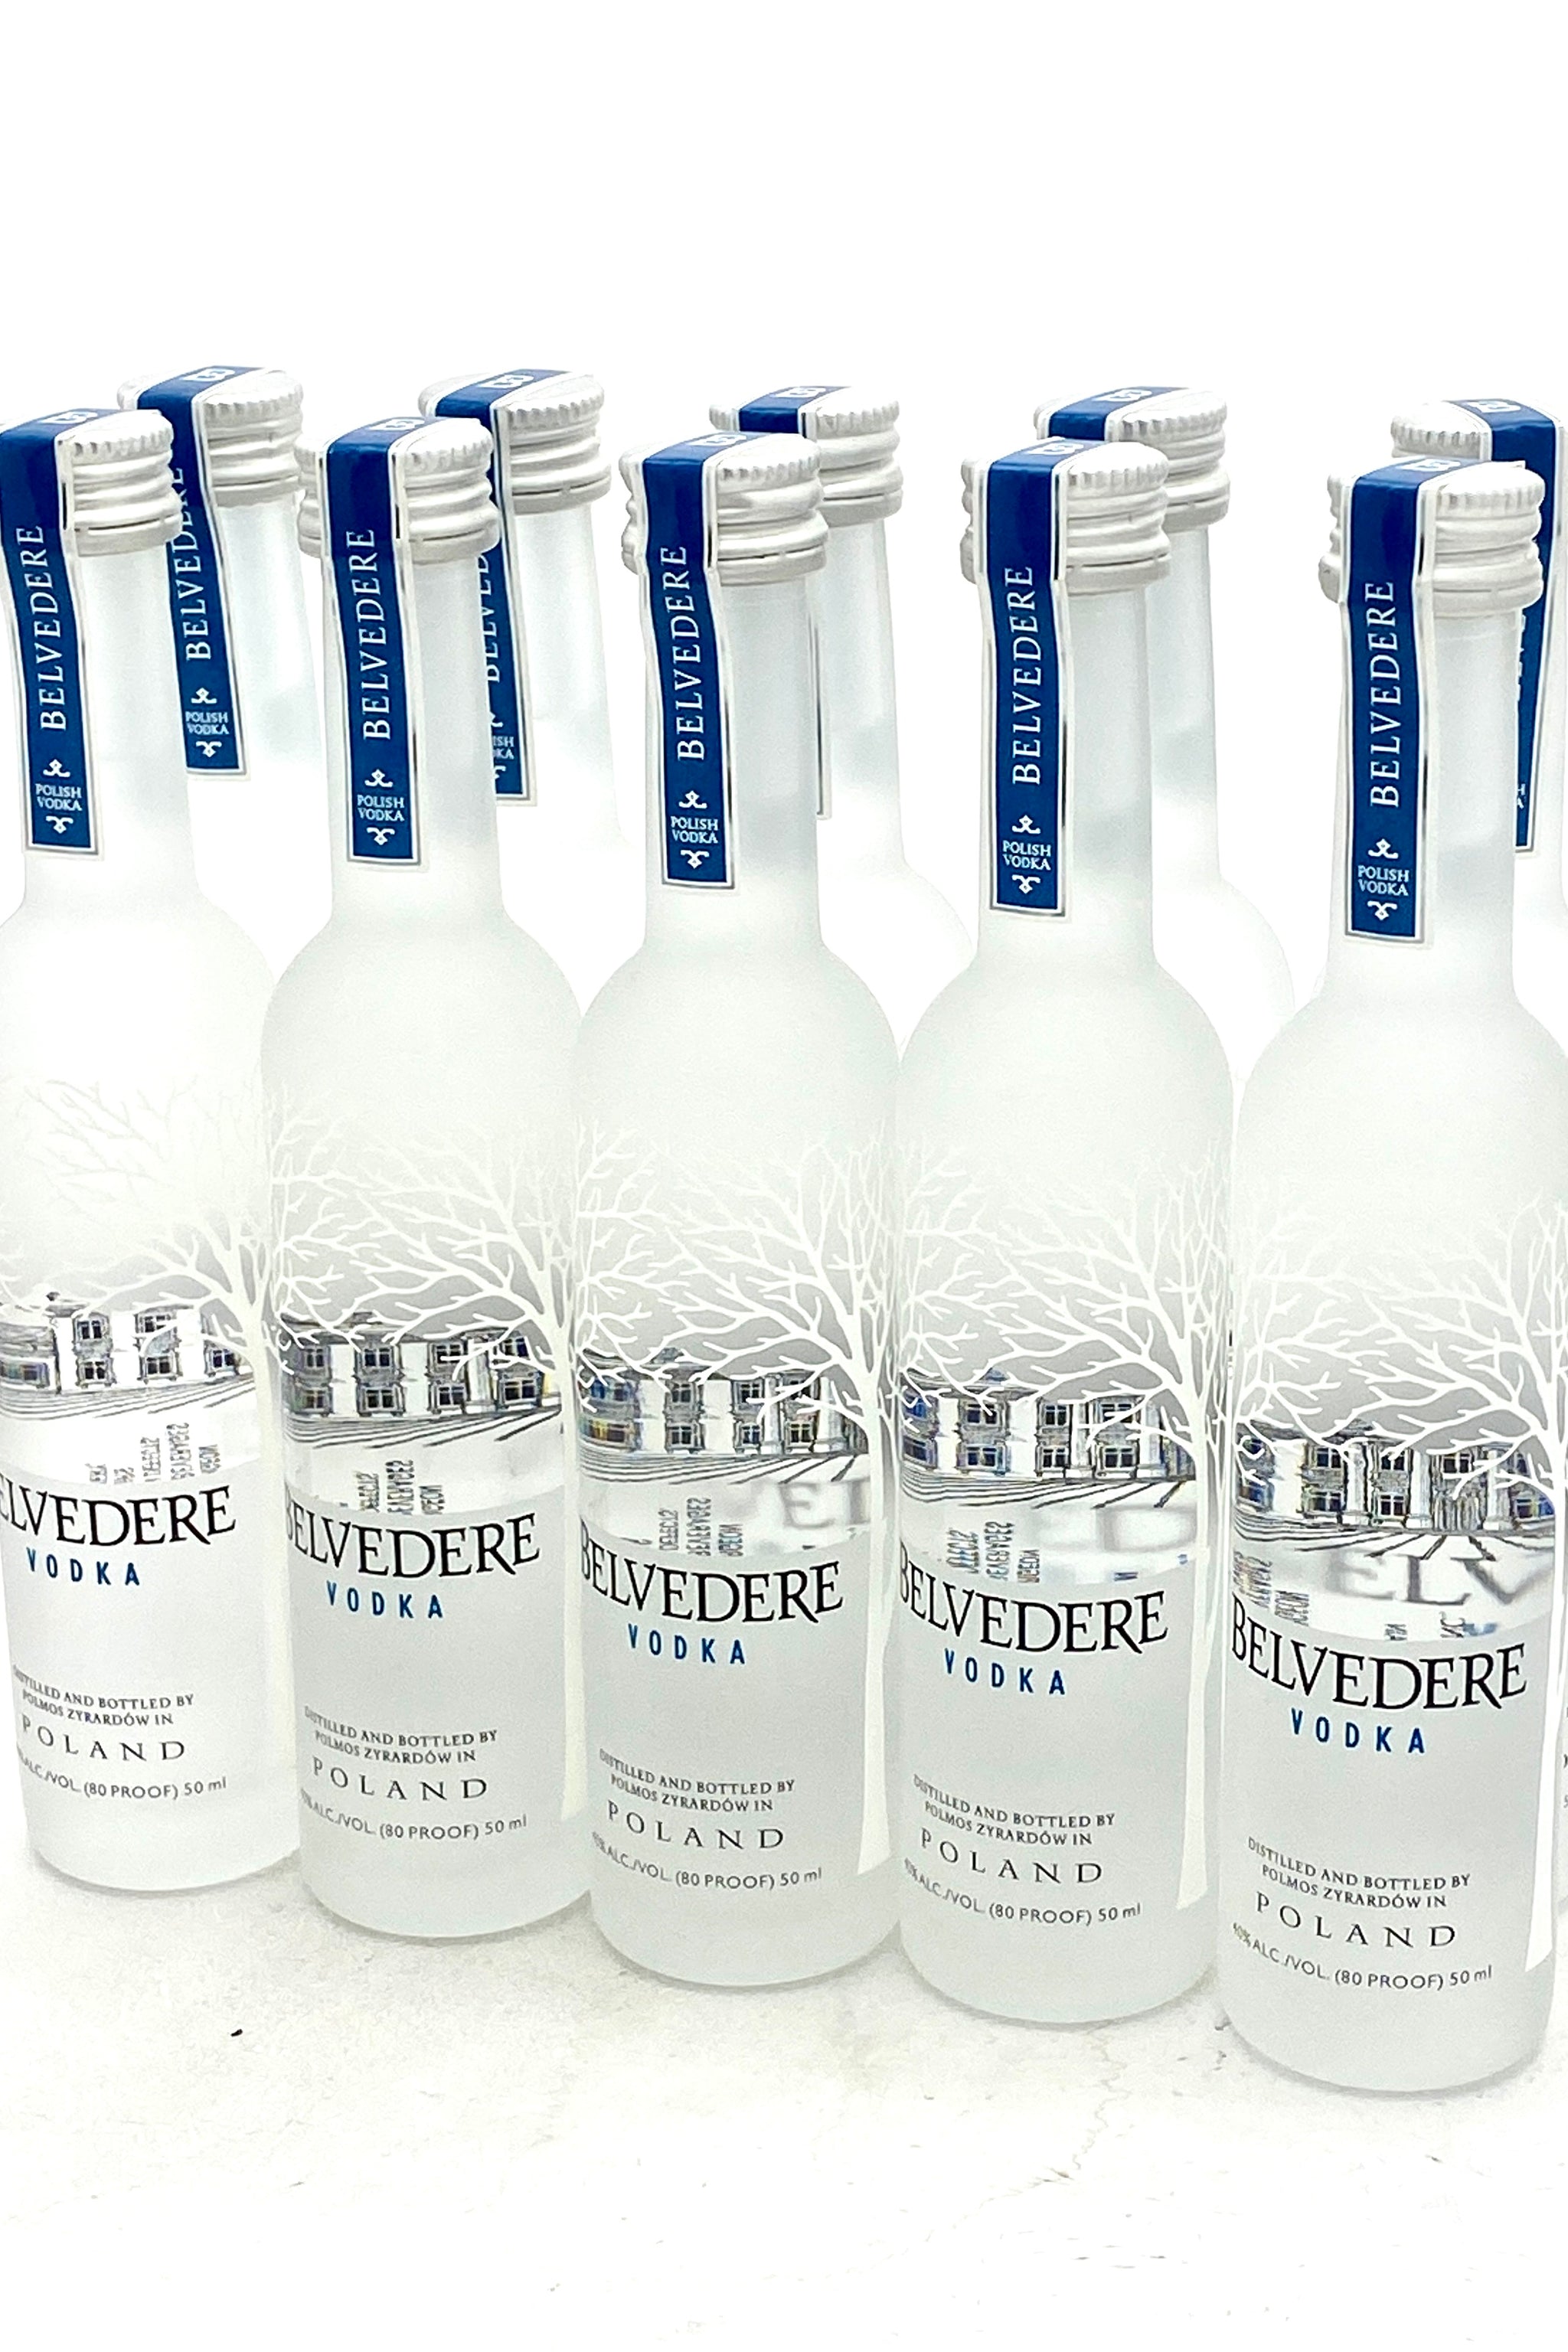 Belvedere, Product page